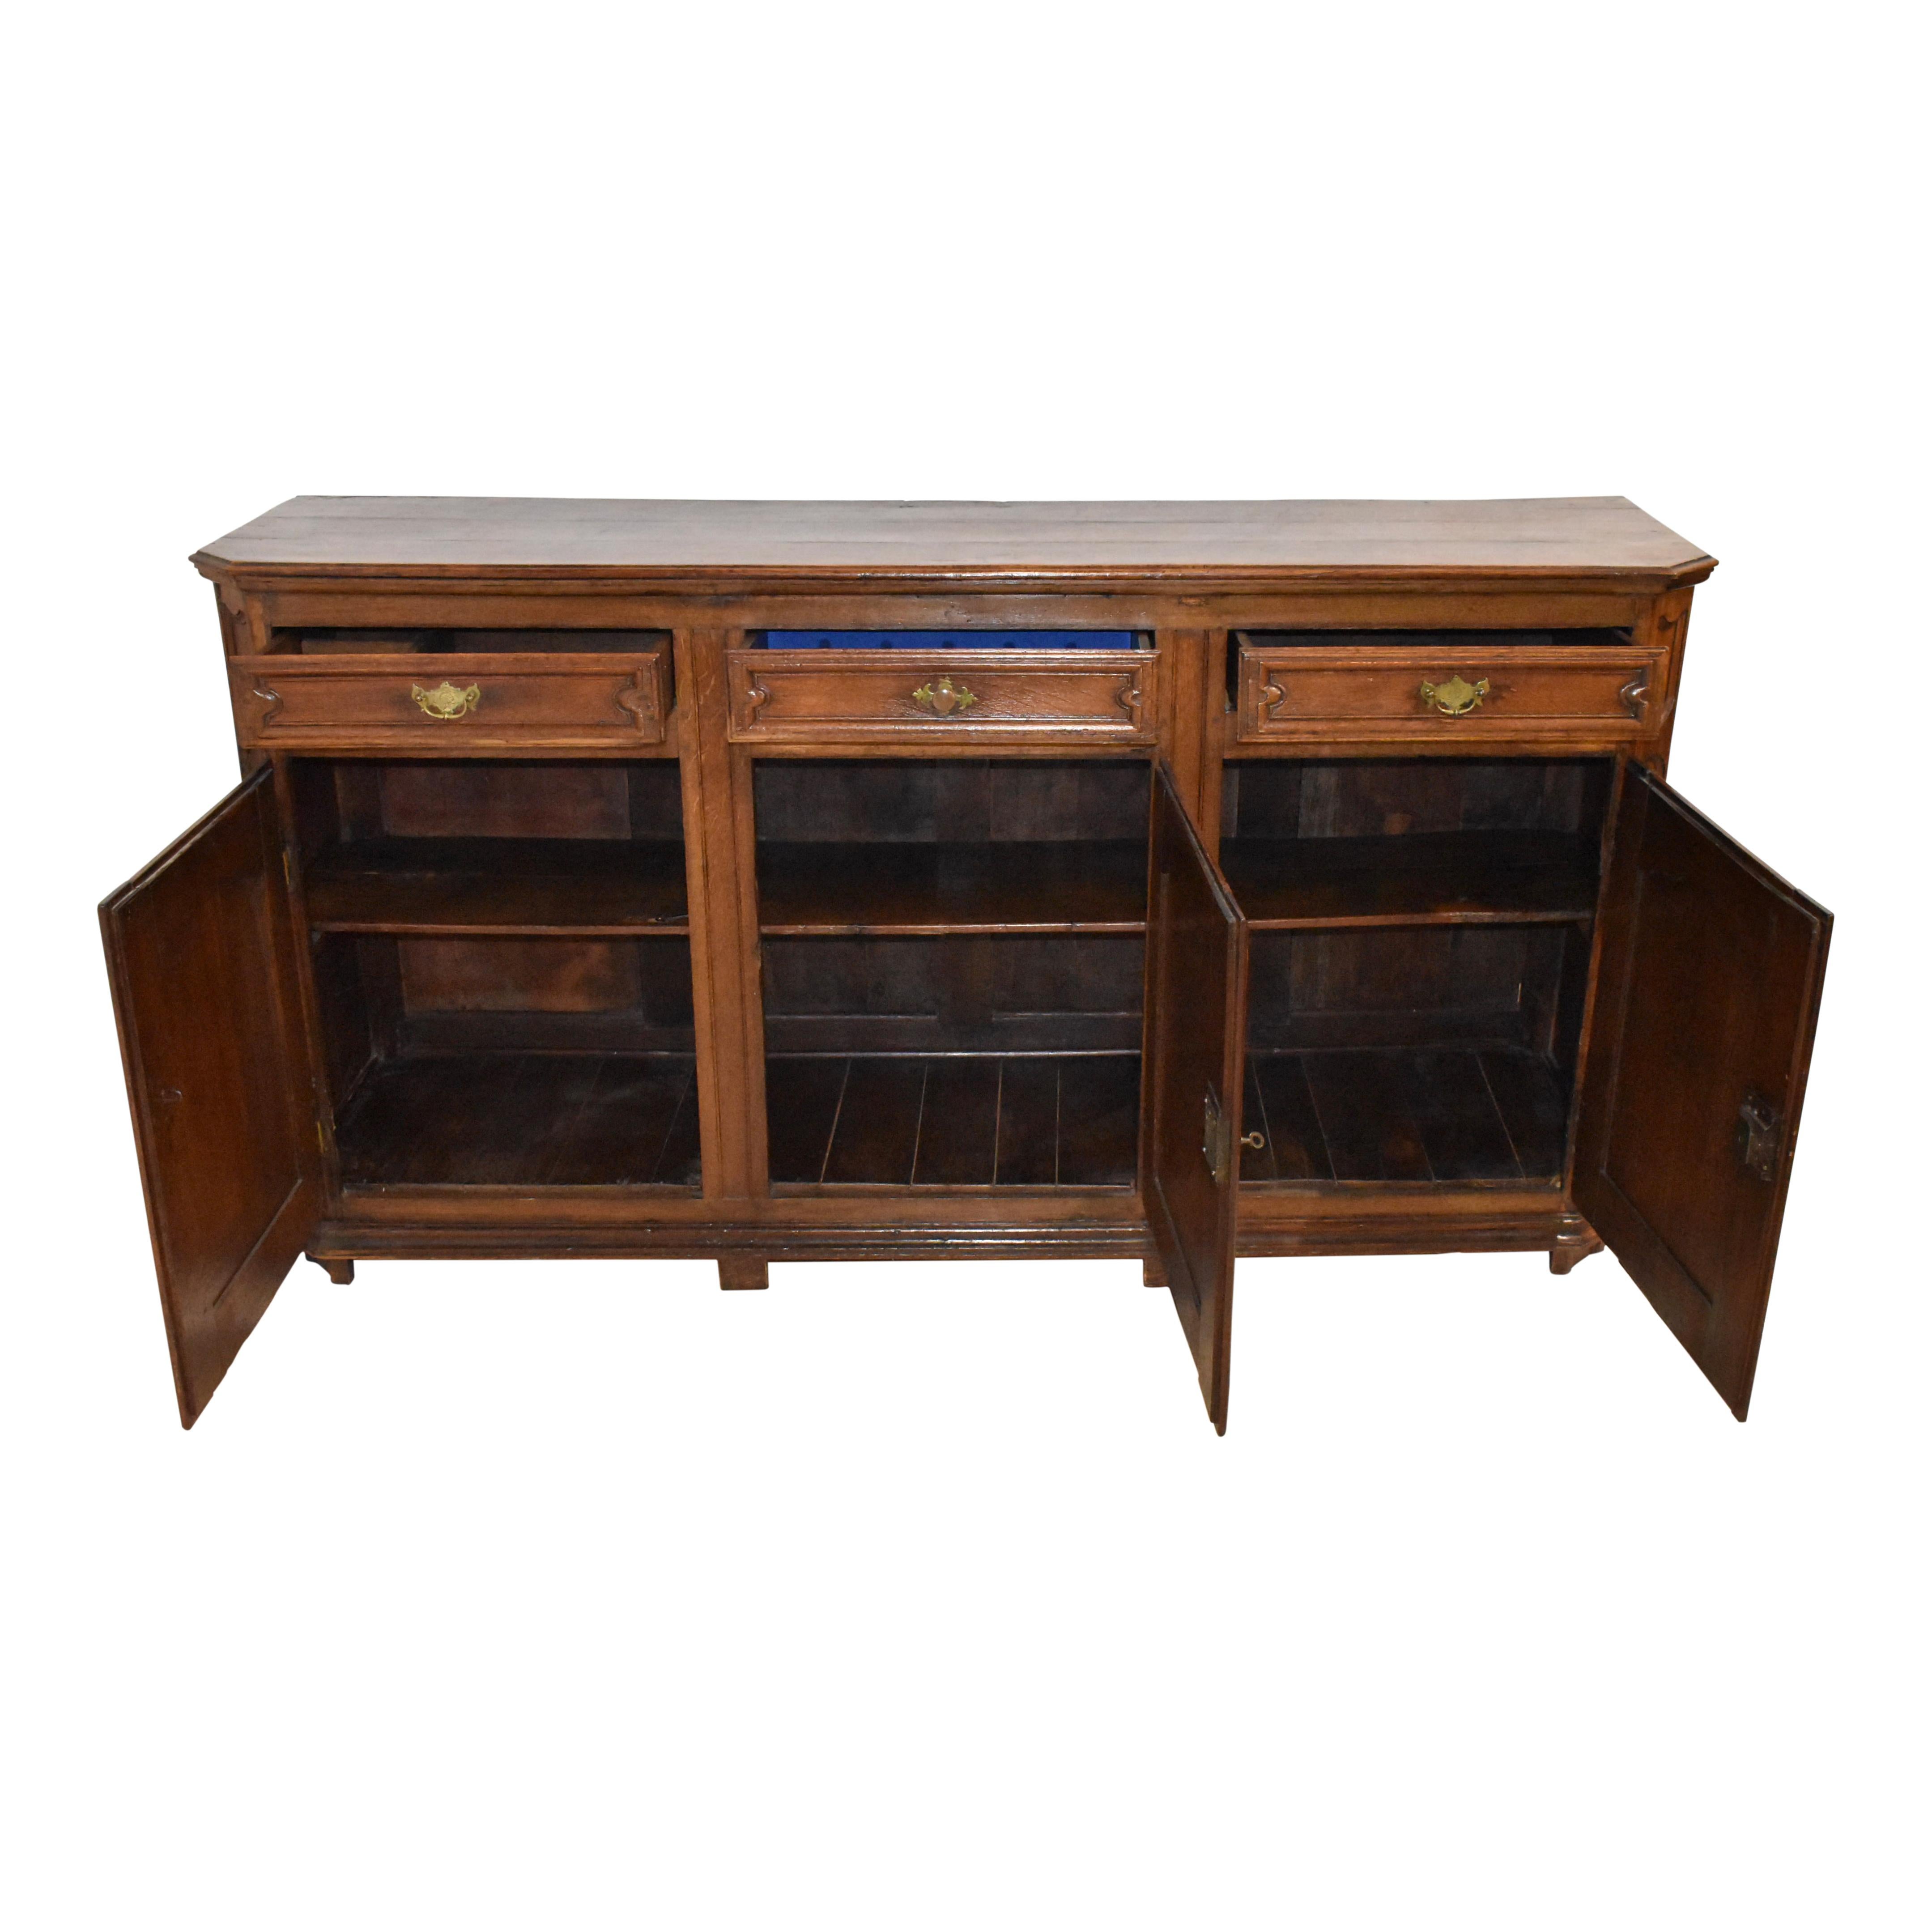 Made of quality European oak and designed with superior craftsmanship, this lengthy sideboard buffet has a footprint of nearly seven feet. Comprised of three drawers over three doors, it has a wealth of storage. The sideboard features a beveled top,